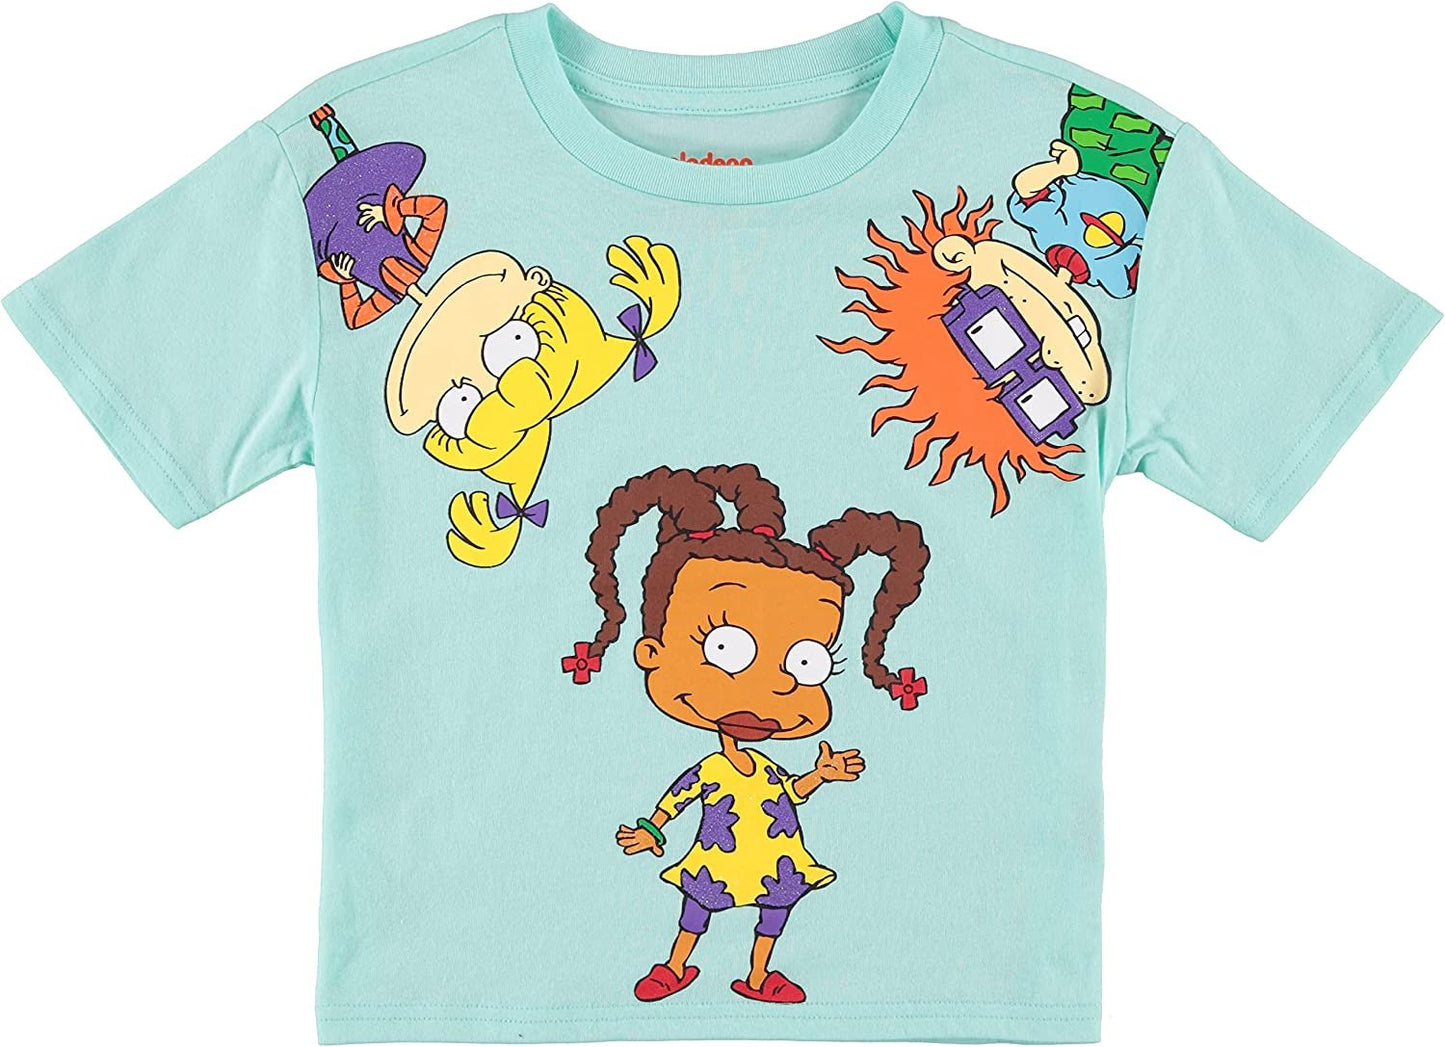 Nickelodeon Rugrats T-Shirt and Biker Shorts- Angelica, Tommy and Suzie T-Shirt Sizes 4-16